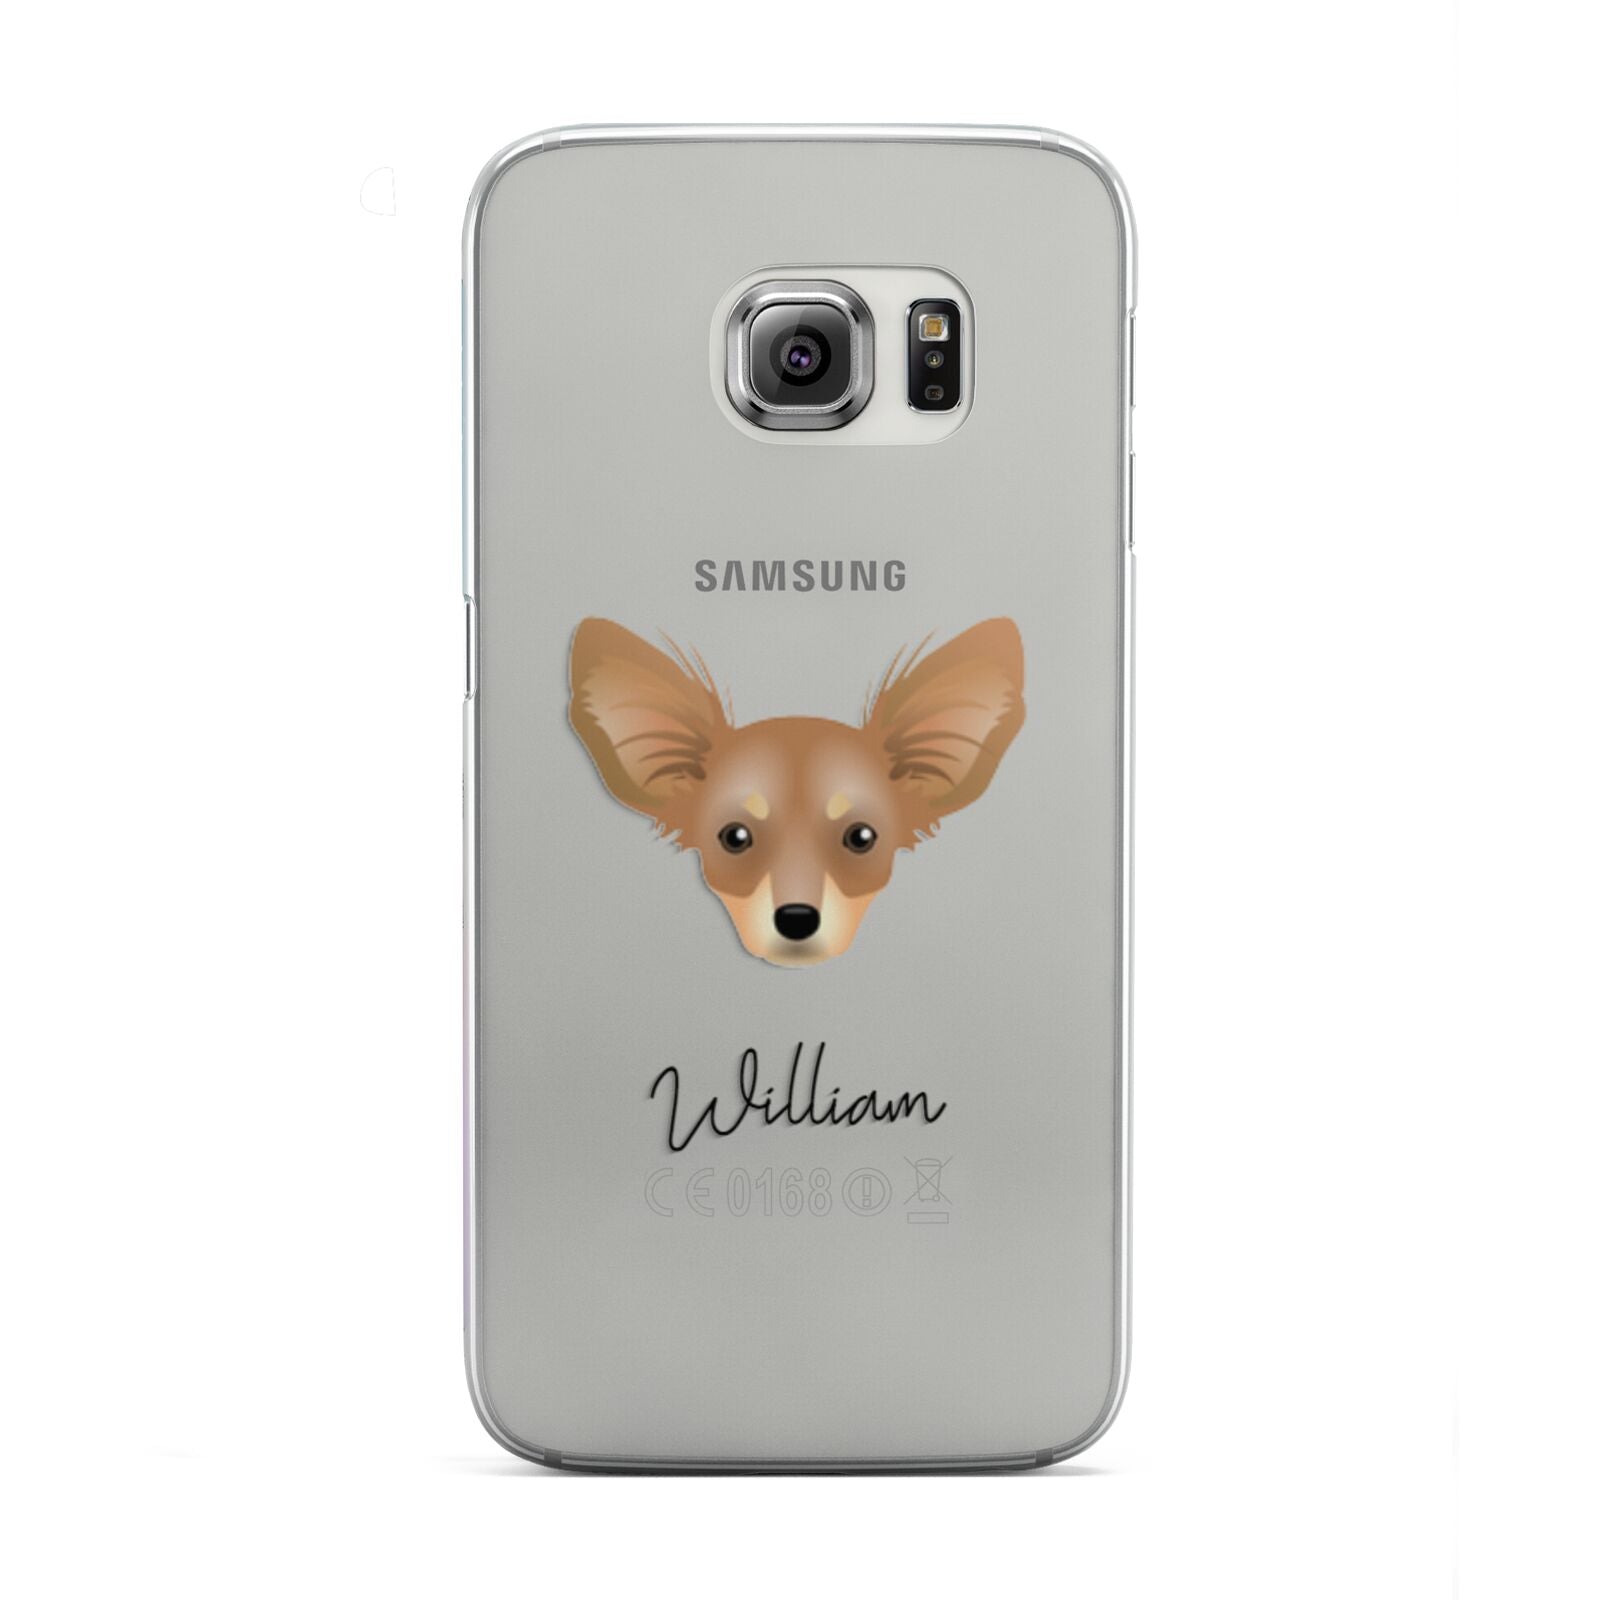 Russian Toy Personalised Samsung Galaxy S6 Edge Case